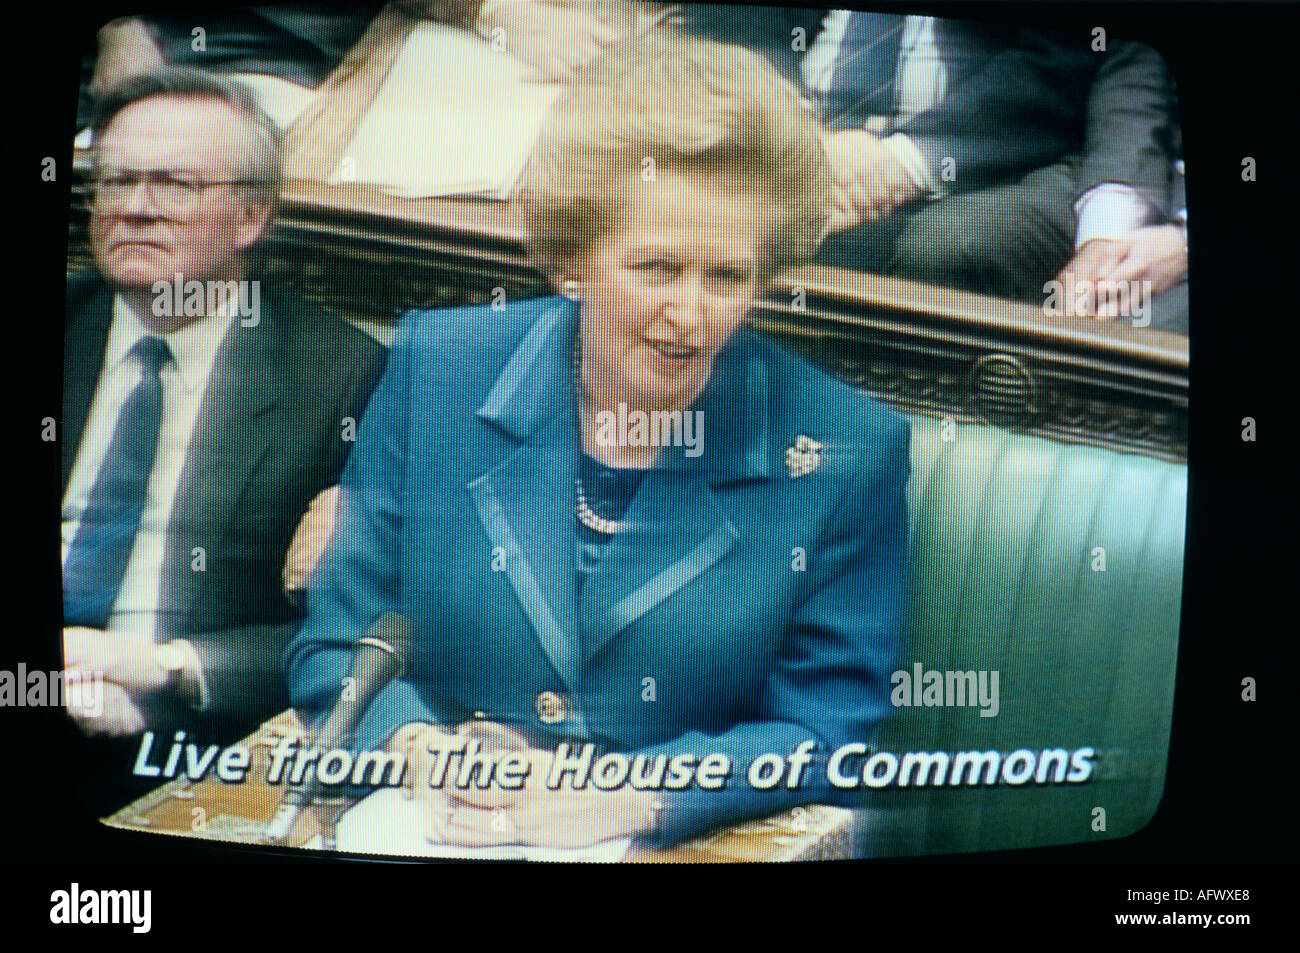 MARGARET THATCHER S RESIGNATION SPEECH ON 22 11 90 IN THE COMMONS AS SHOWN ON TV 1990 Stock Photo